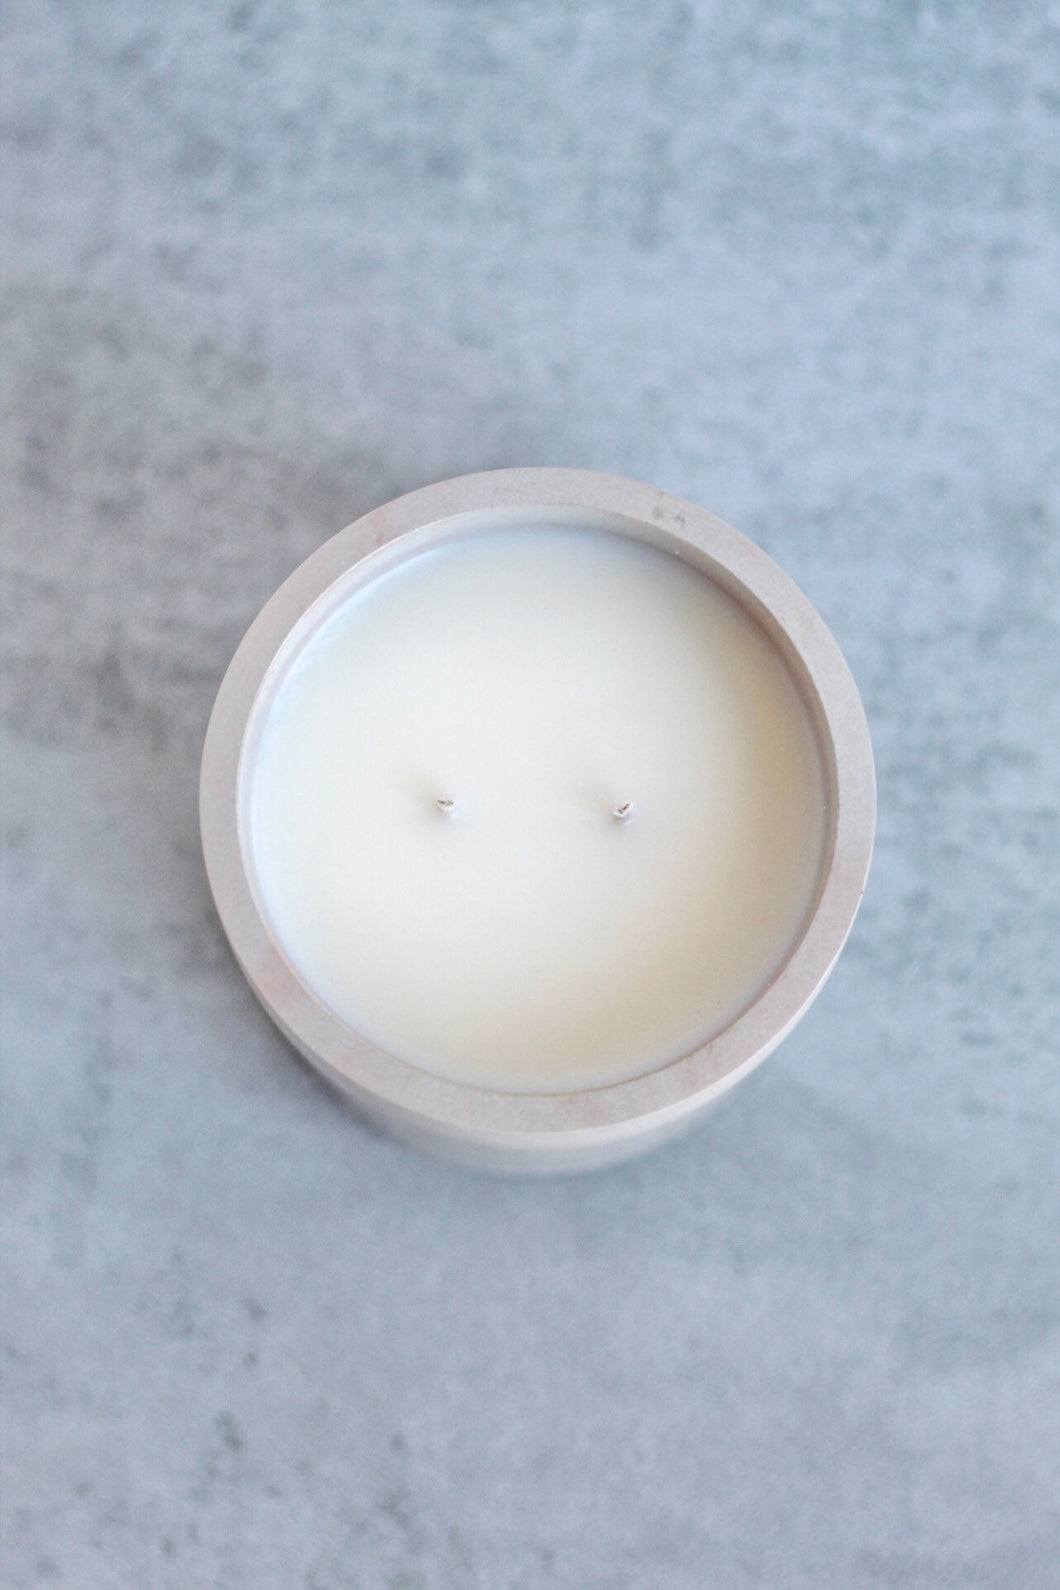 Sun Concrete Candle Collection, Hand Poured Double Wick Soy Candle, 9 oz